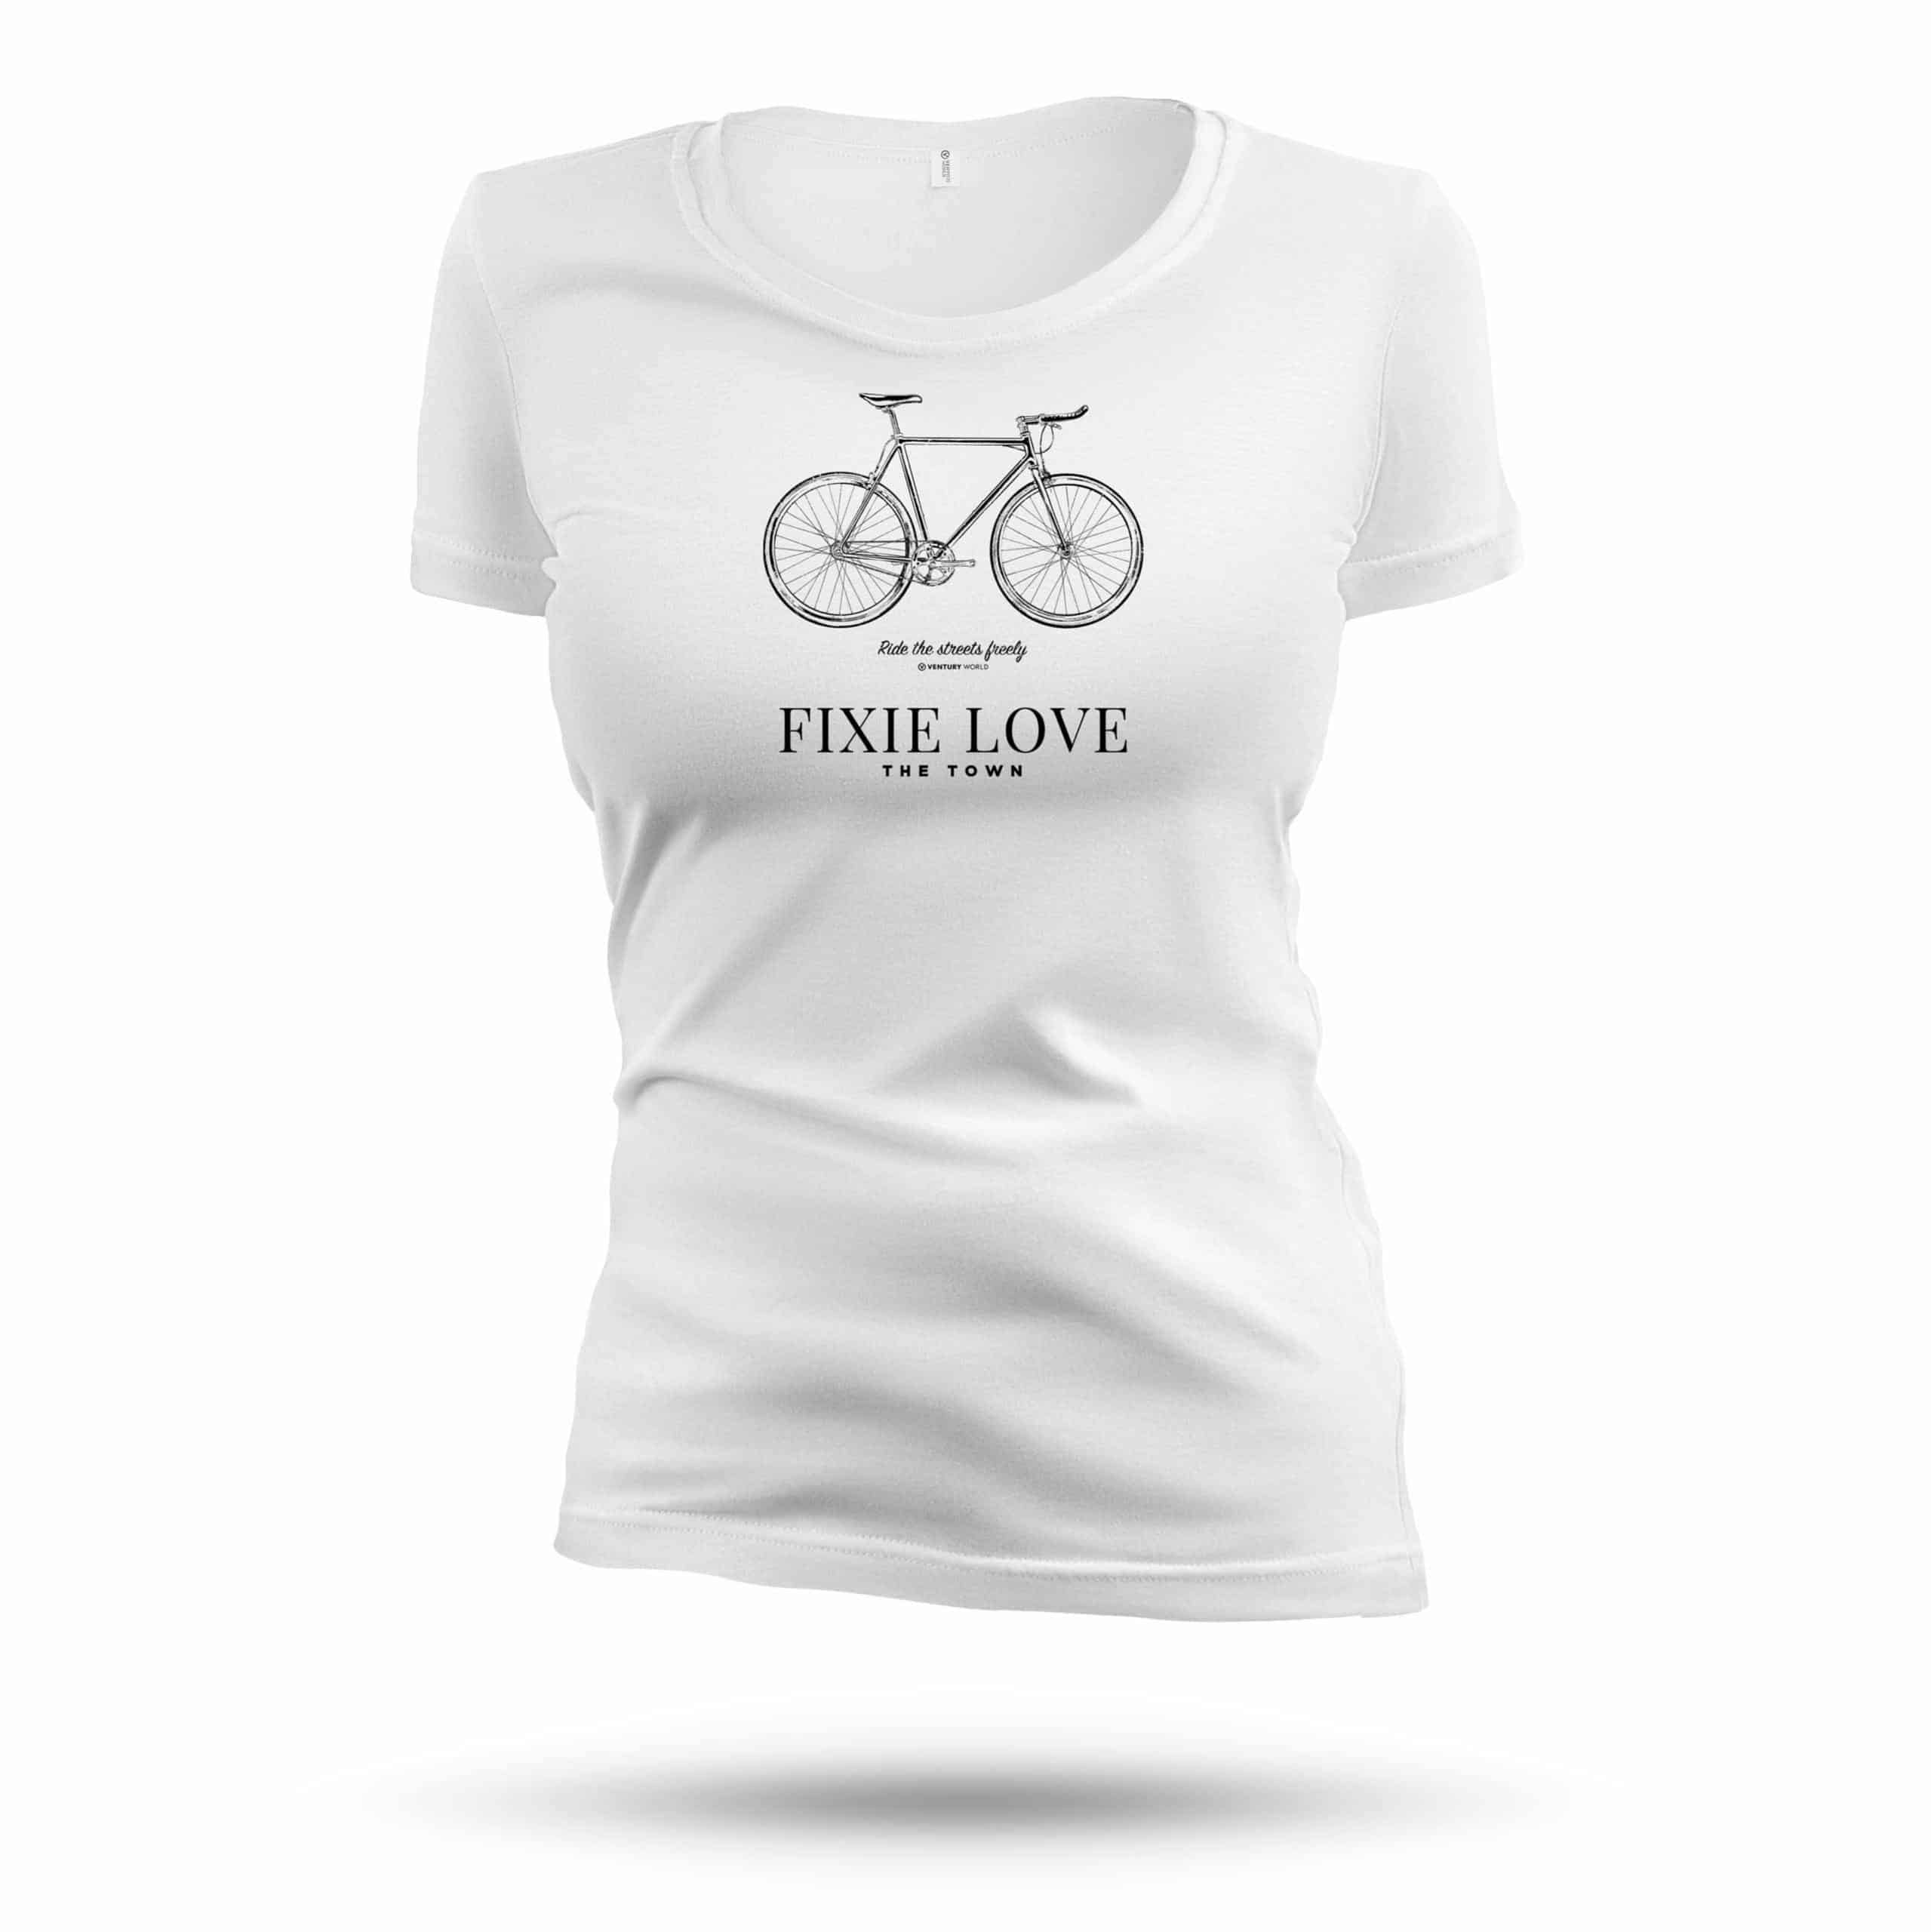 T-shirt cycling femme - Fixie Bike femme - Ride the streets freely - collection tee shirt Live freely 100% Naturel coupe ajustée grand col rond .